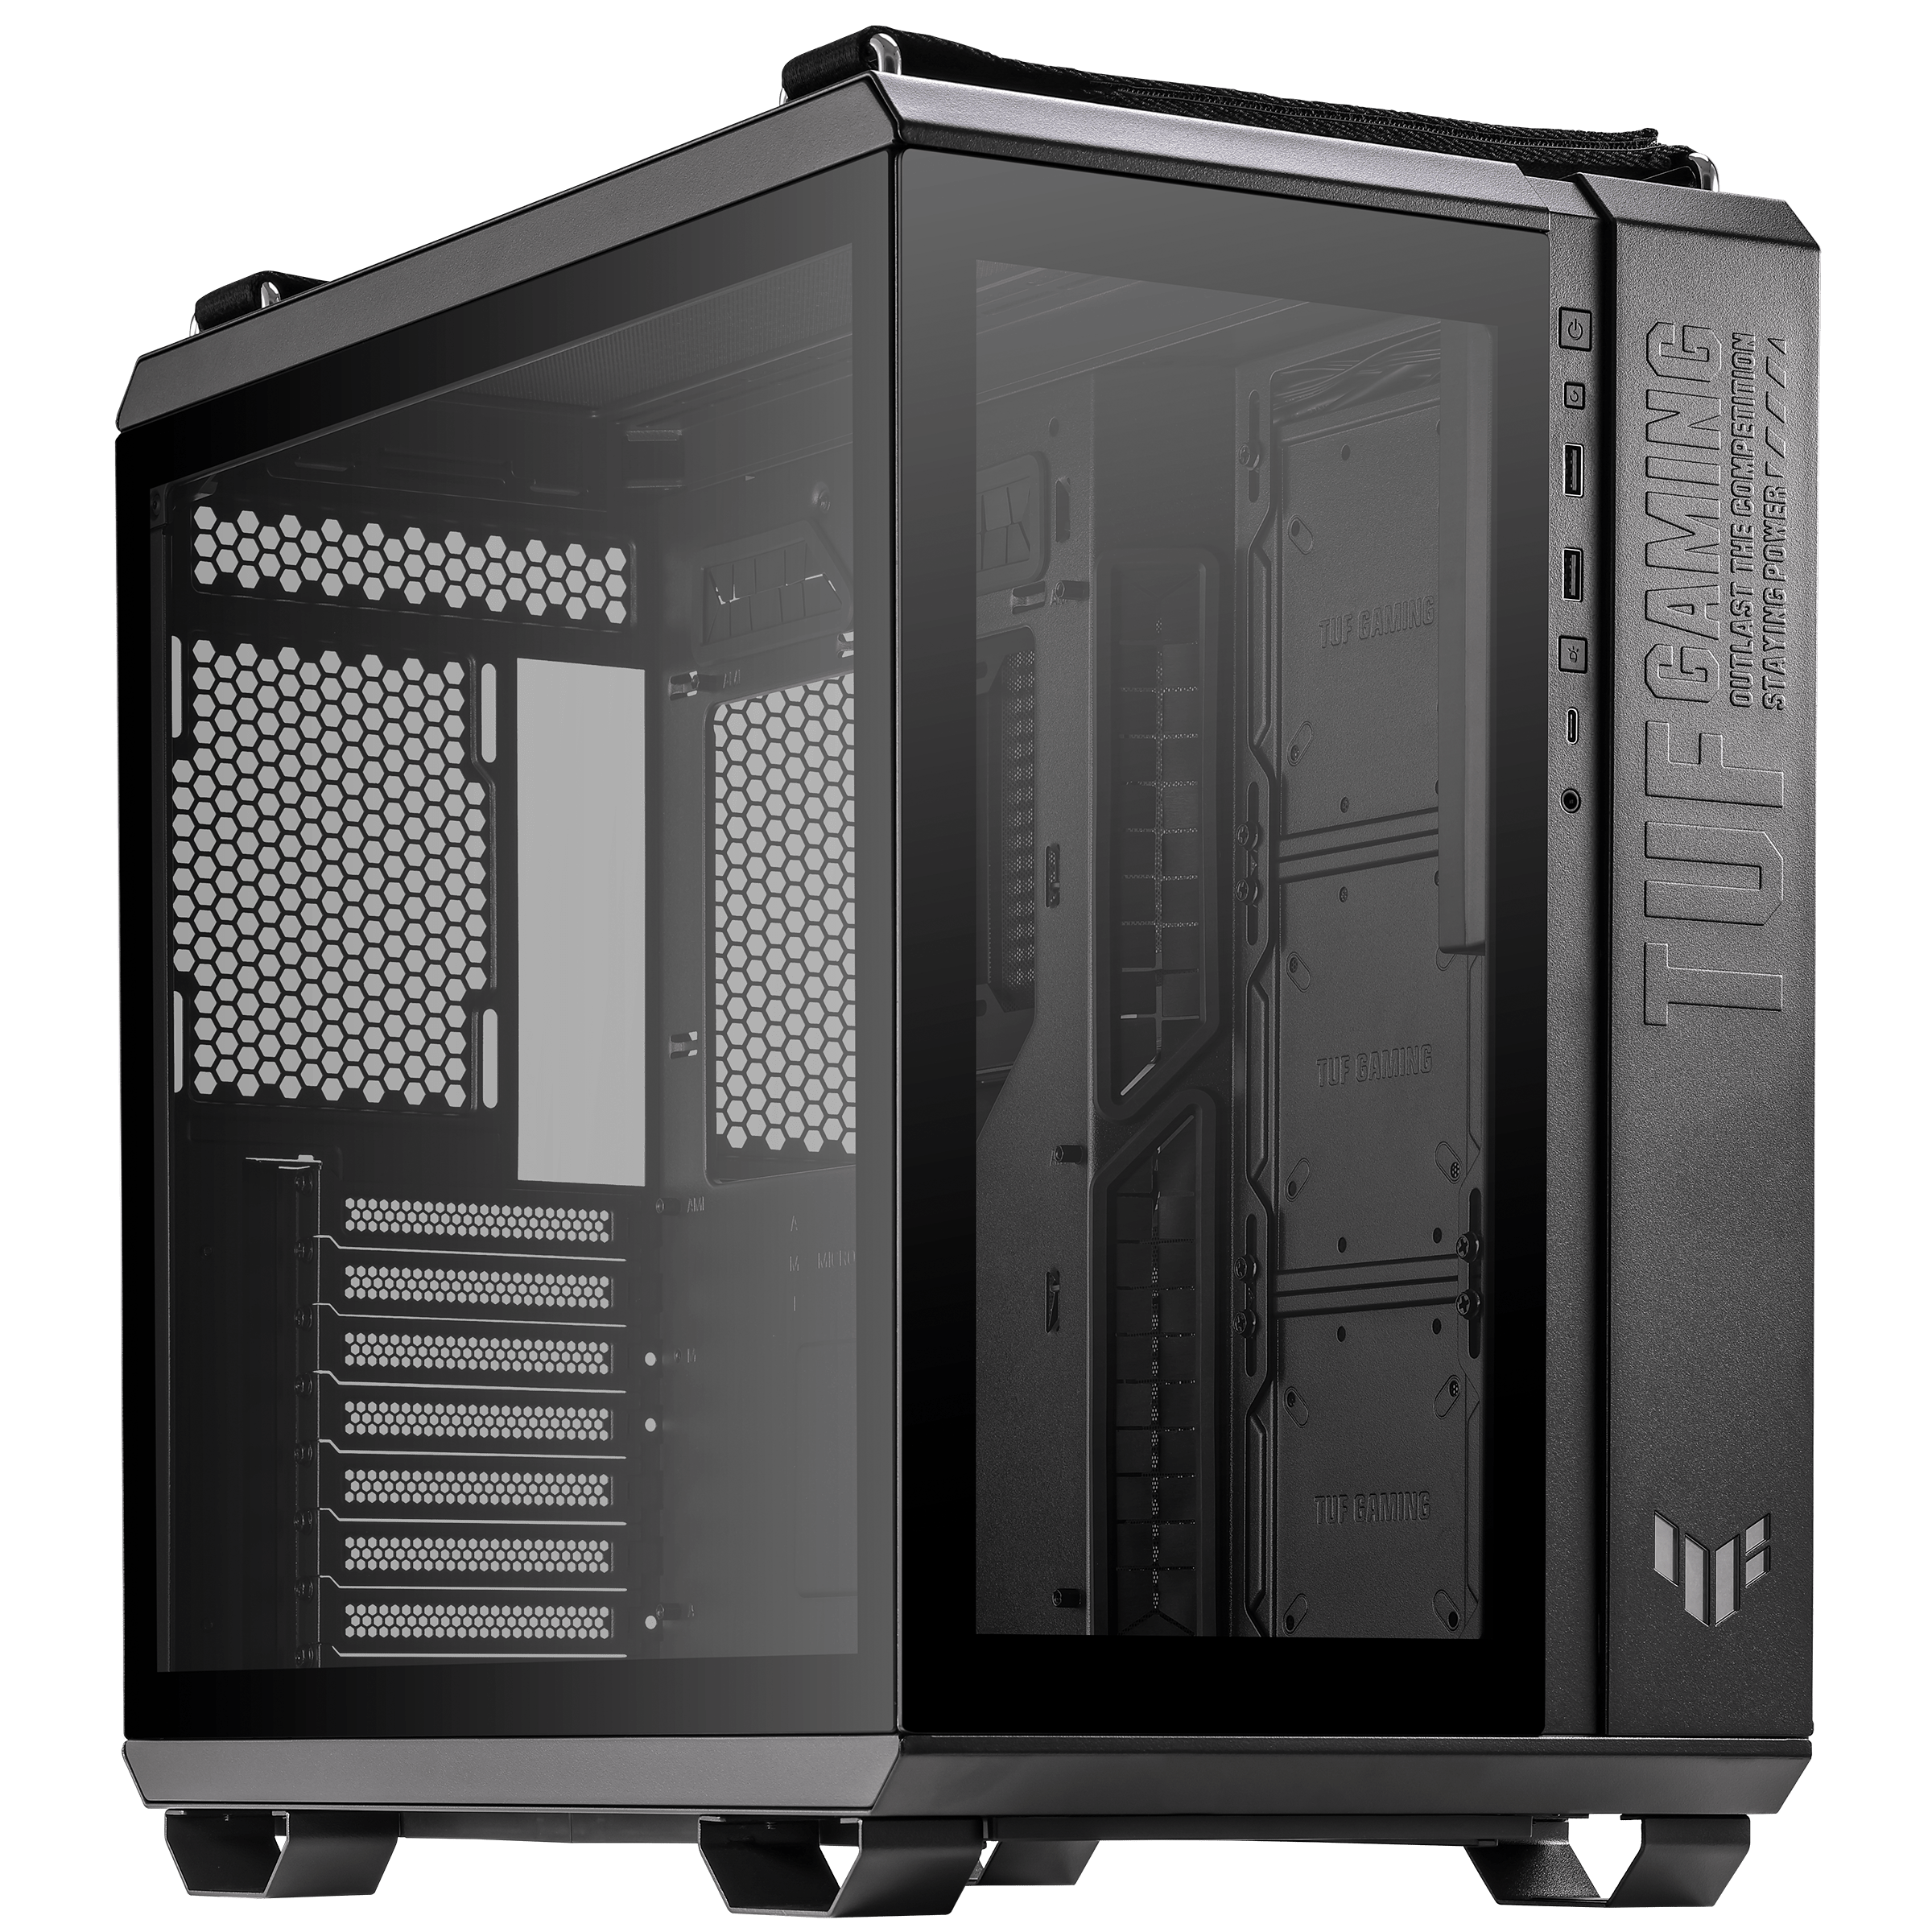 Asus TUF GT502 in review - What options does the case offer?